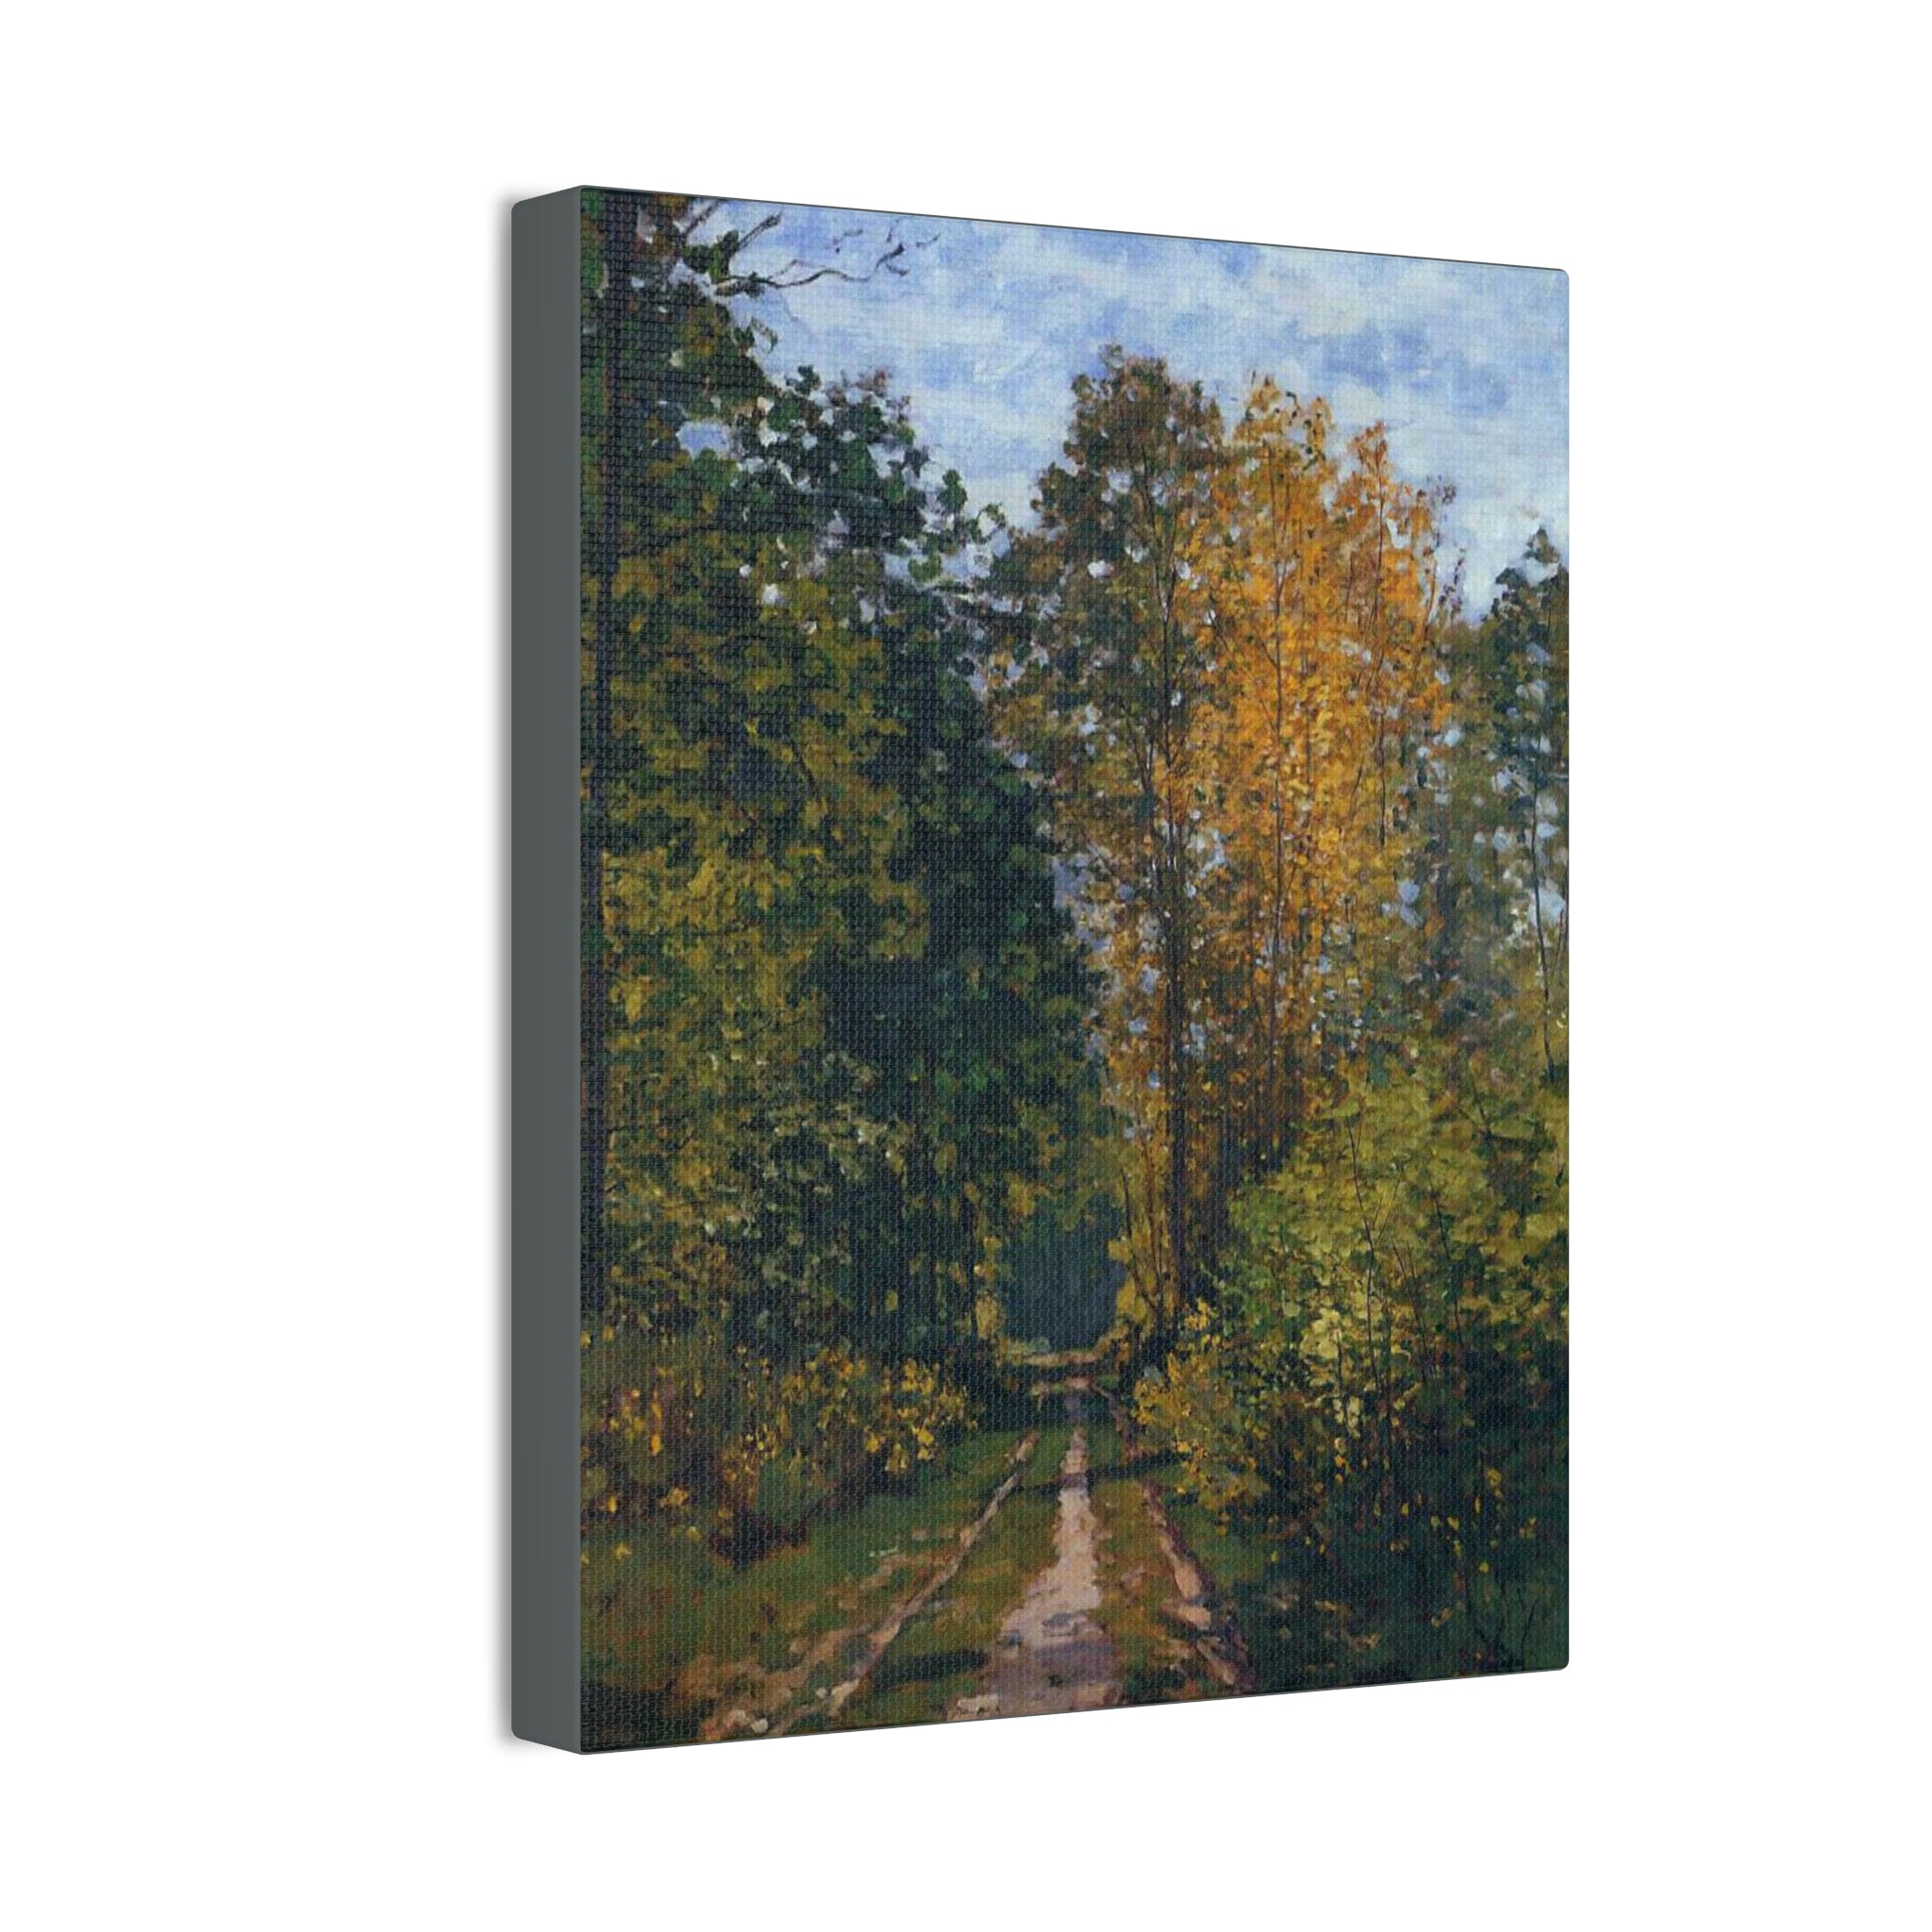 Wooded Path 1865 - Claude Monet - Canvas Stretched, 0.75"